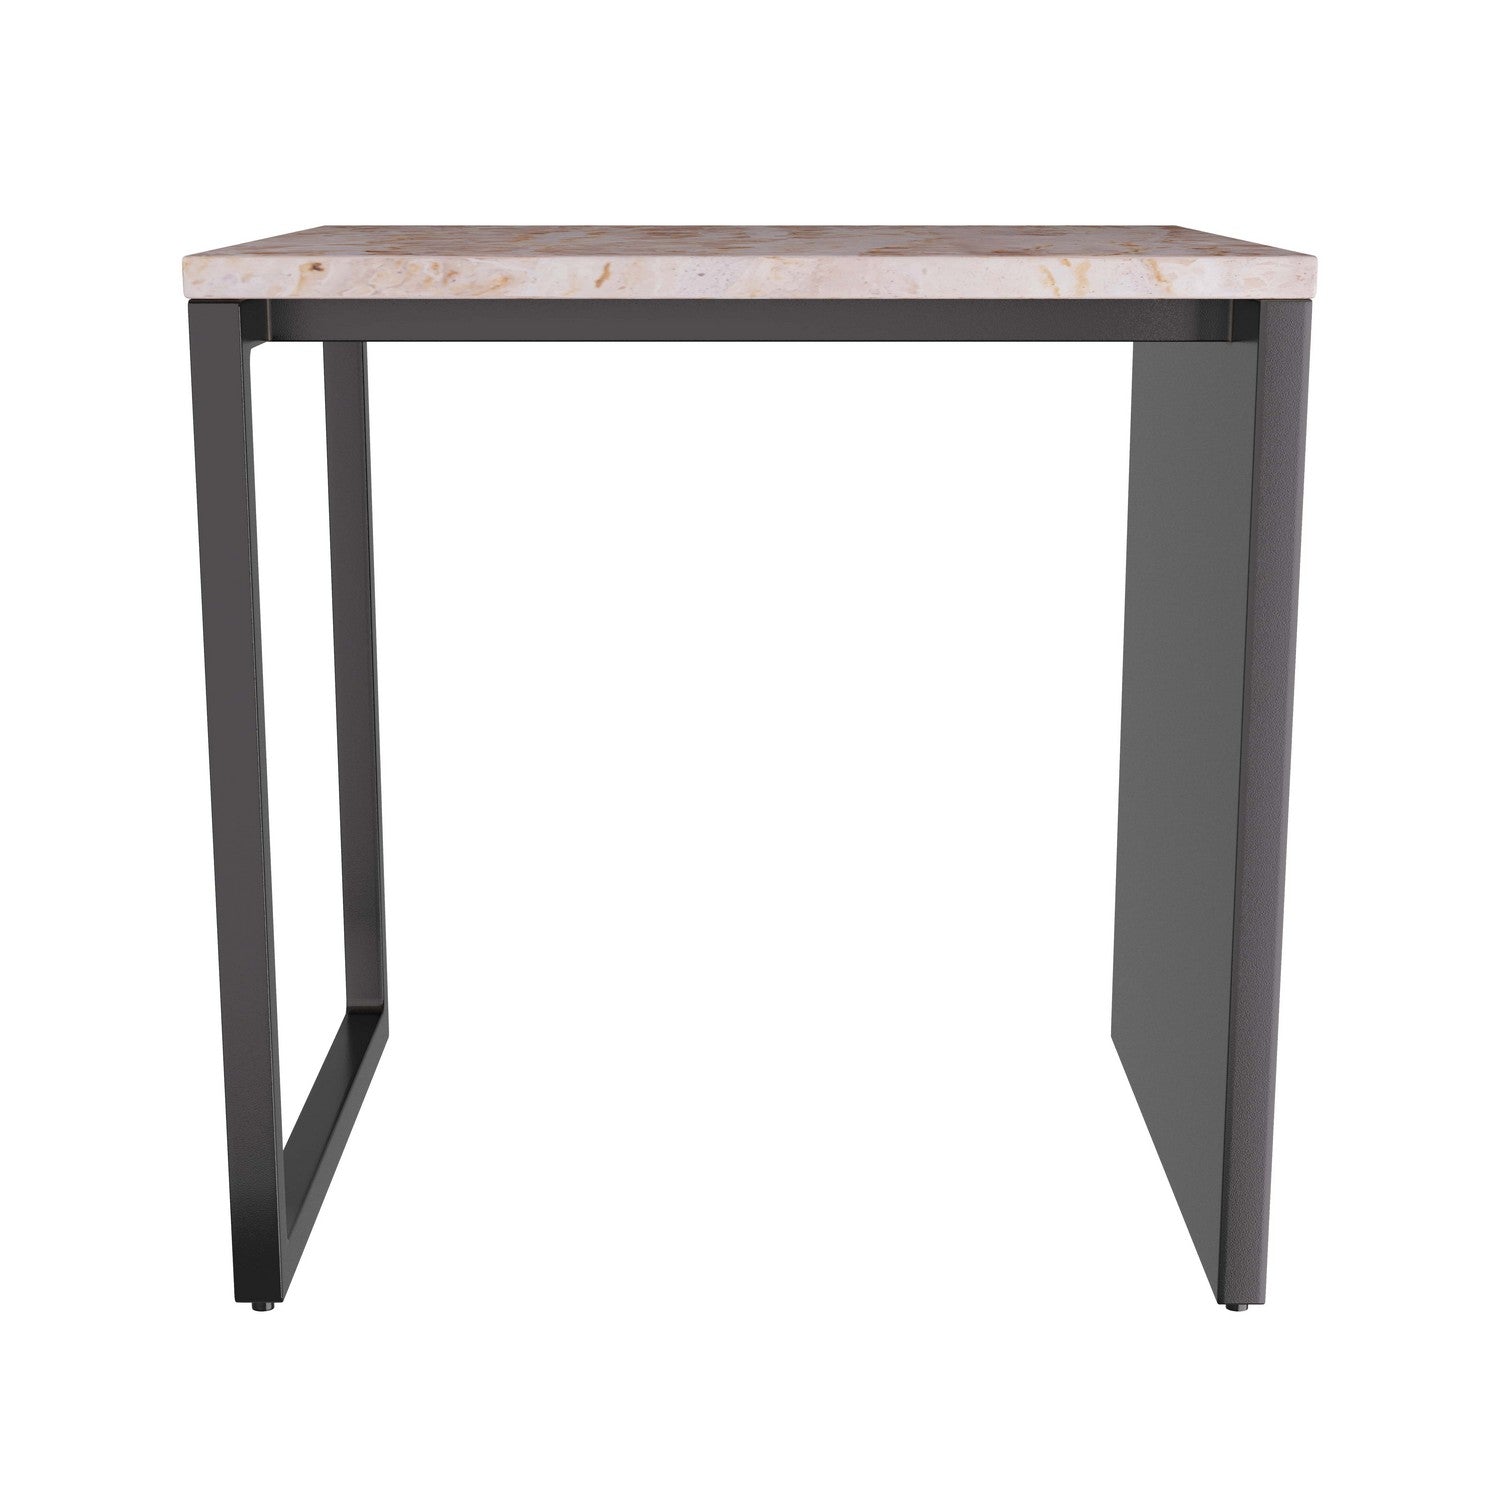 End Table from the Verbena collection in Capri finish